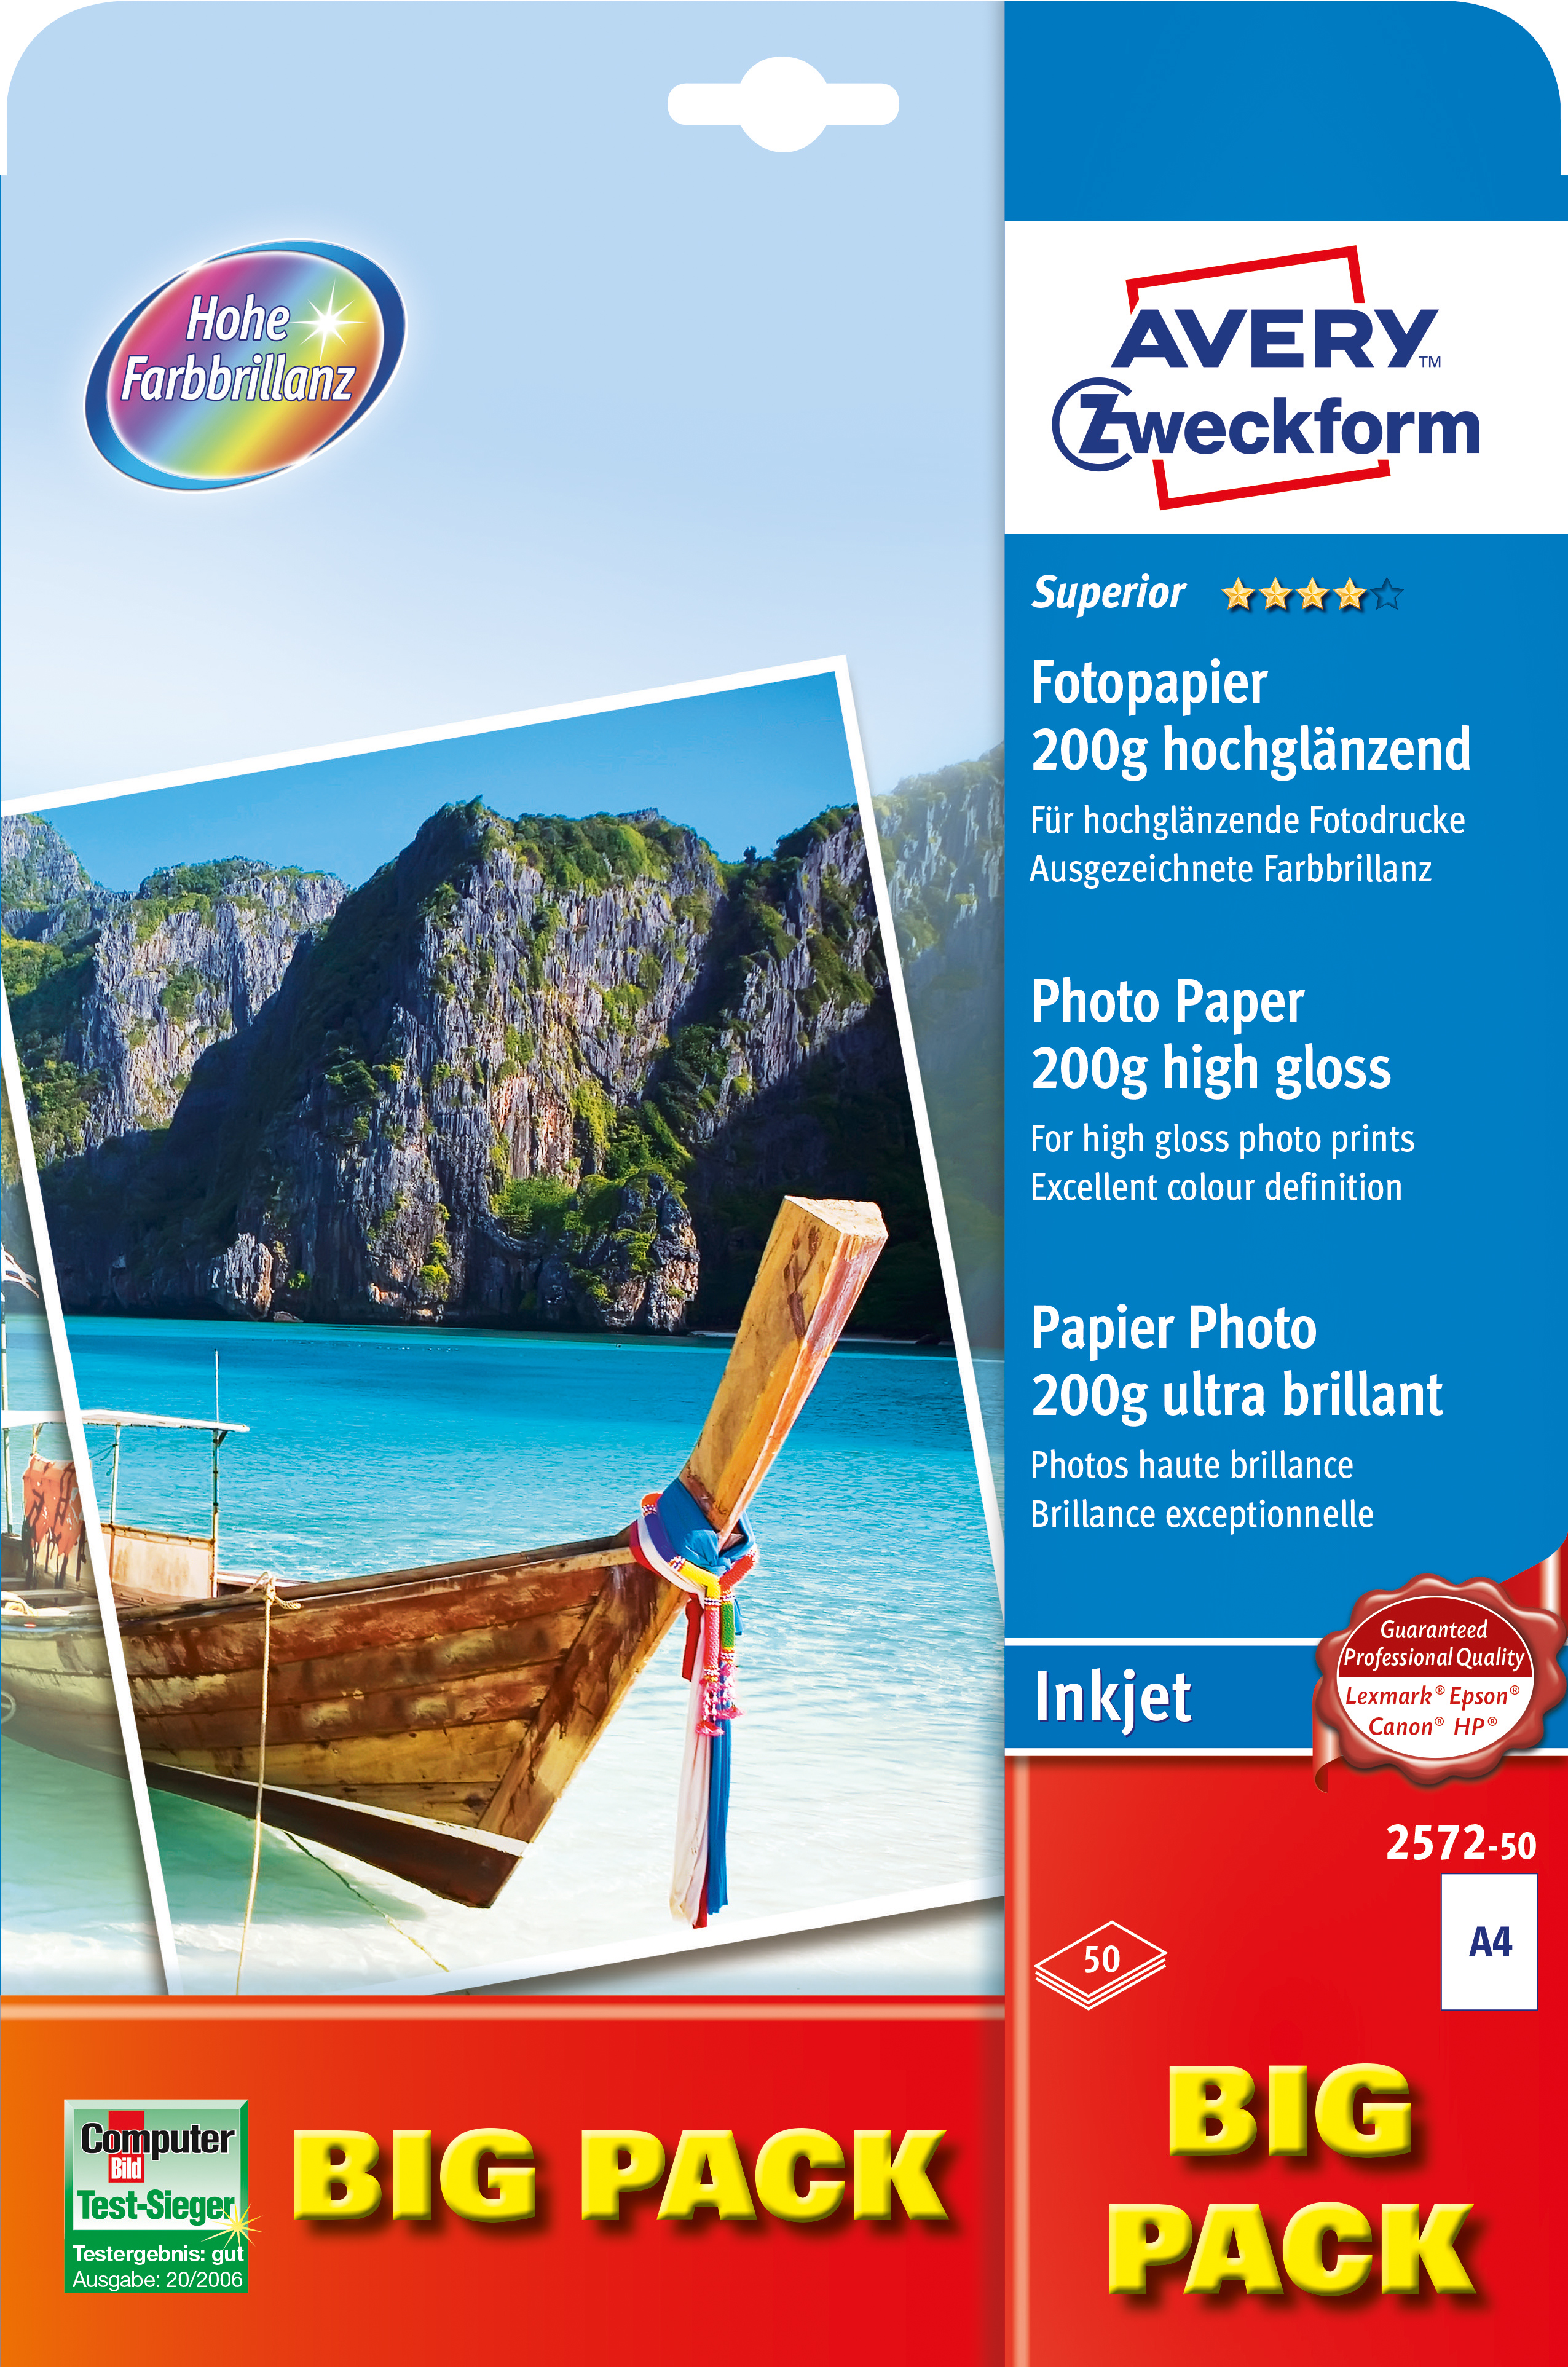 AVERY ZWECKFORM InkJet Photo Paper A4 2572-50 200g,glossy, blanc 50 feuilles